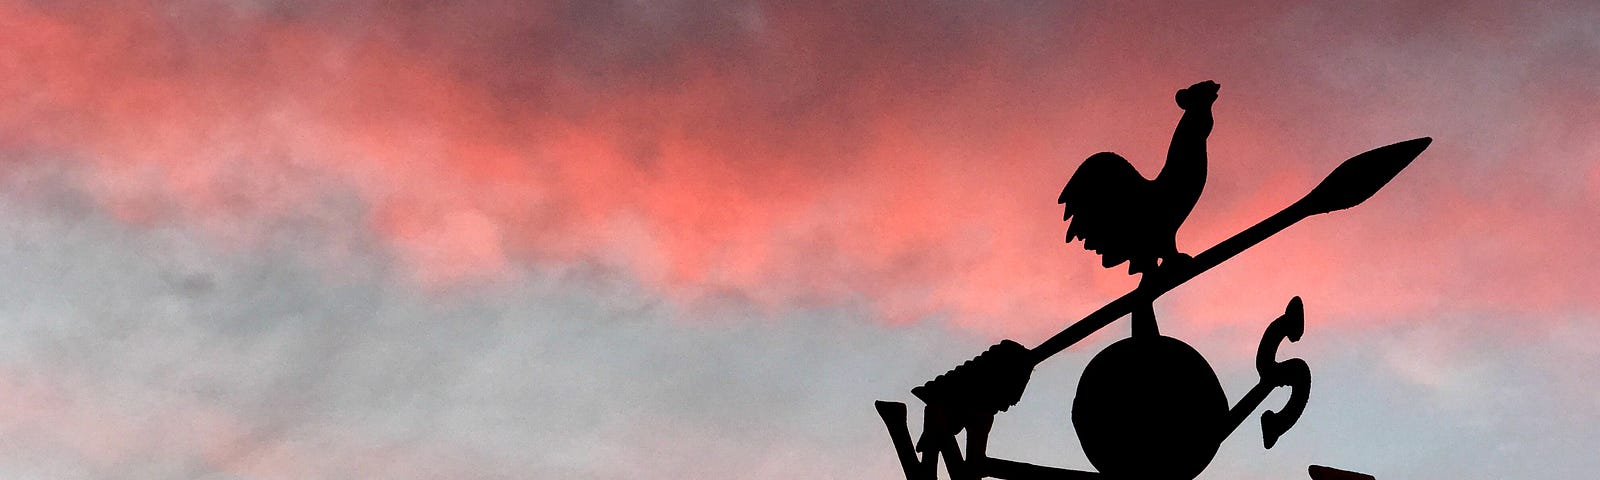 A weather vane attempts to point the way for us against a backdrop of sunset sky.